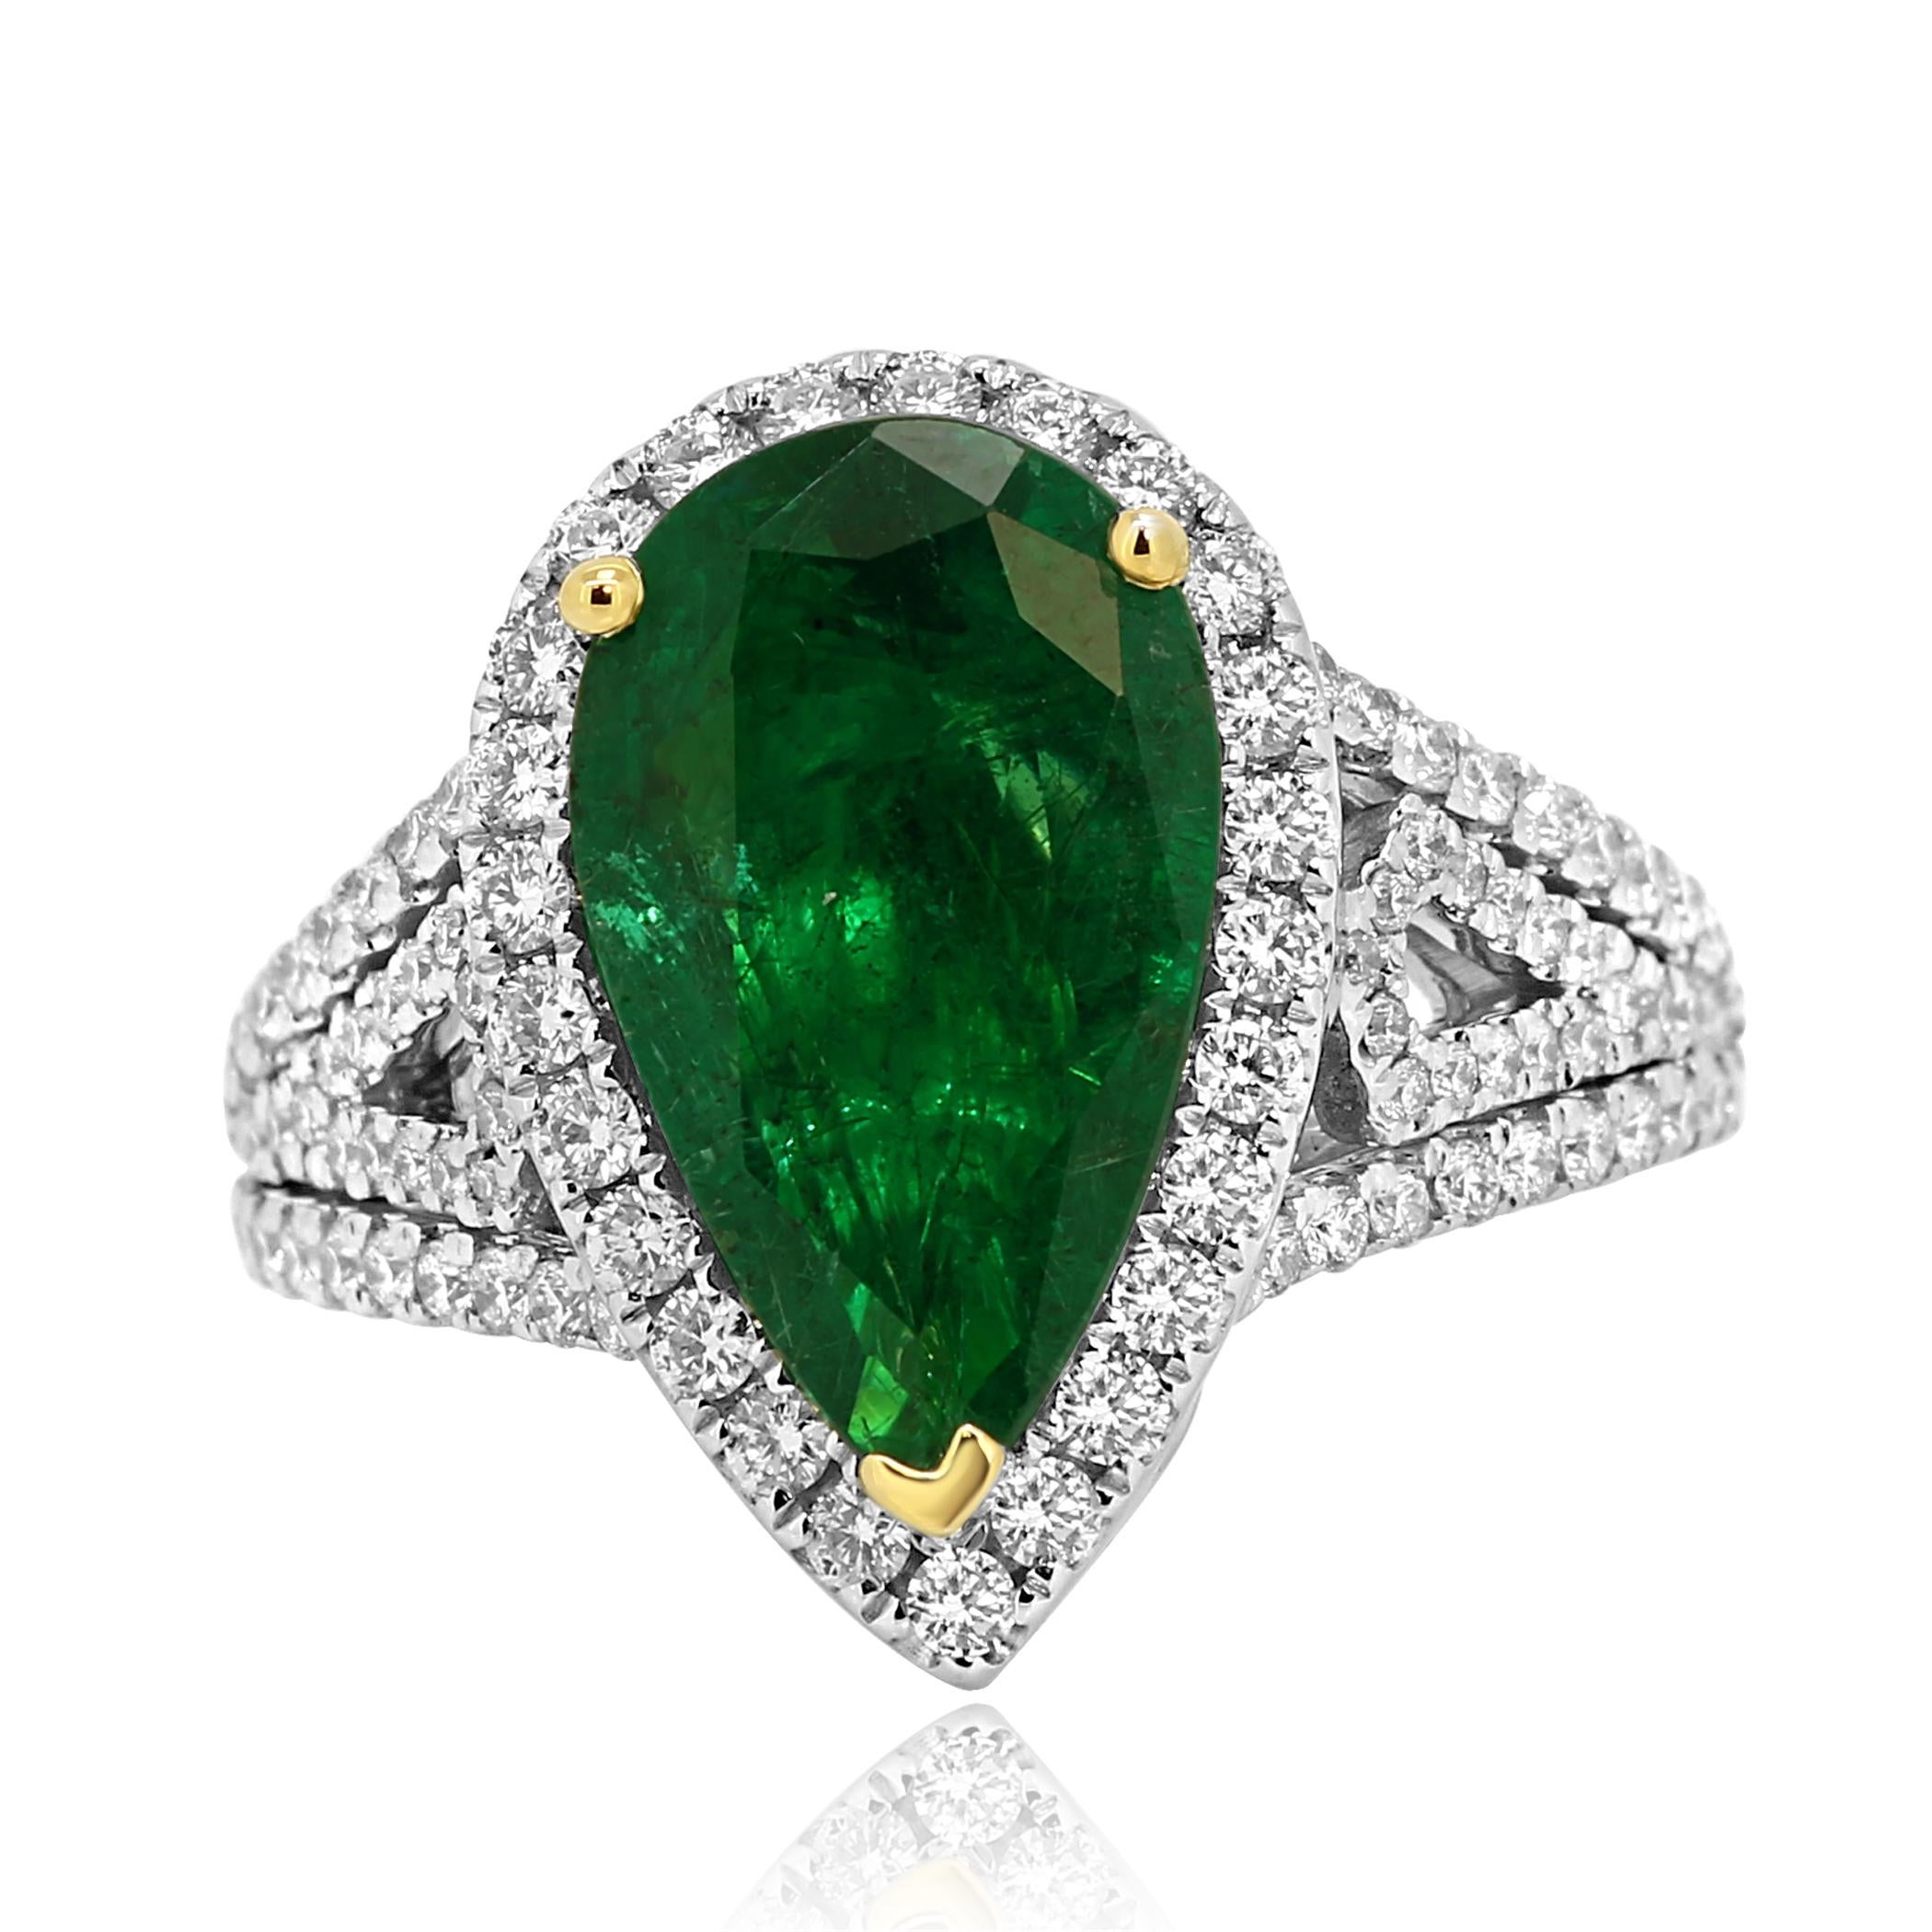 Stunning GIA Certified  2.79 Carat Emerald Pear Shape Encircled in a Halo of White Round Diamond 0.75 Carat in Gorgeous 14K White and Yellow Gold Bridal as Well as Cocktail Ring.

Style available in different price ranges. Prices are based on your